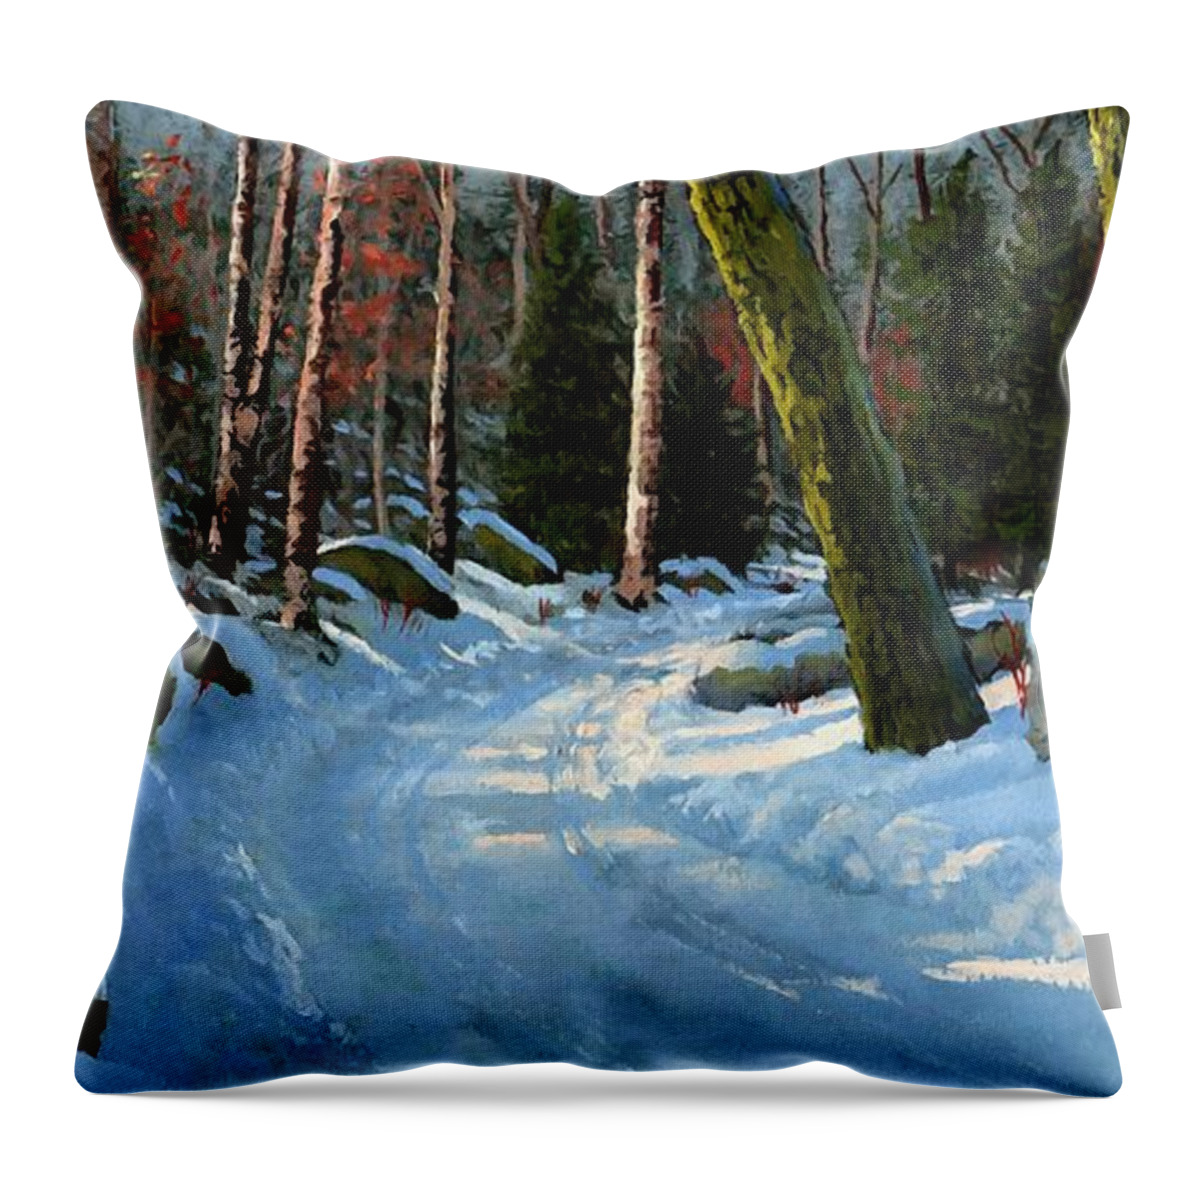 Winter Road Throw Pillow featuring the painting Winter Road by Frank Wilson